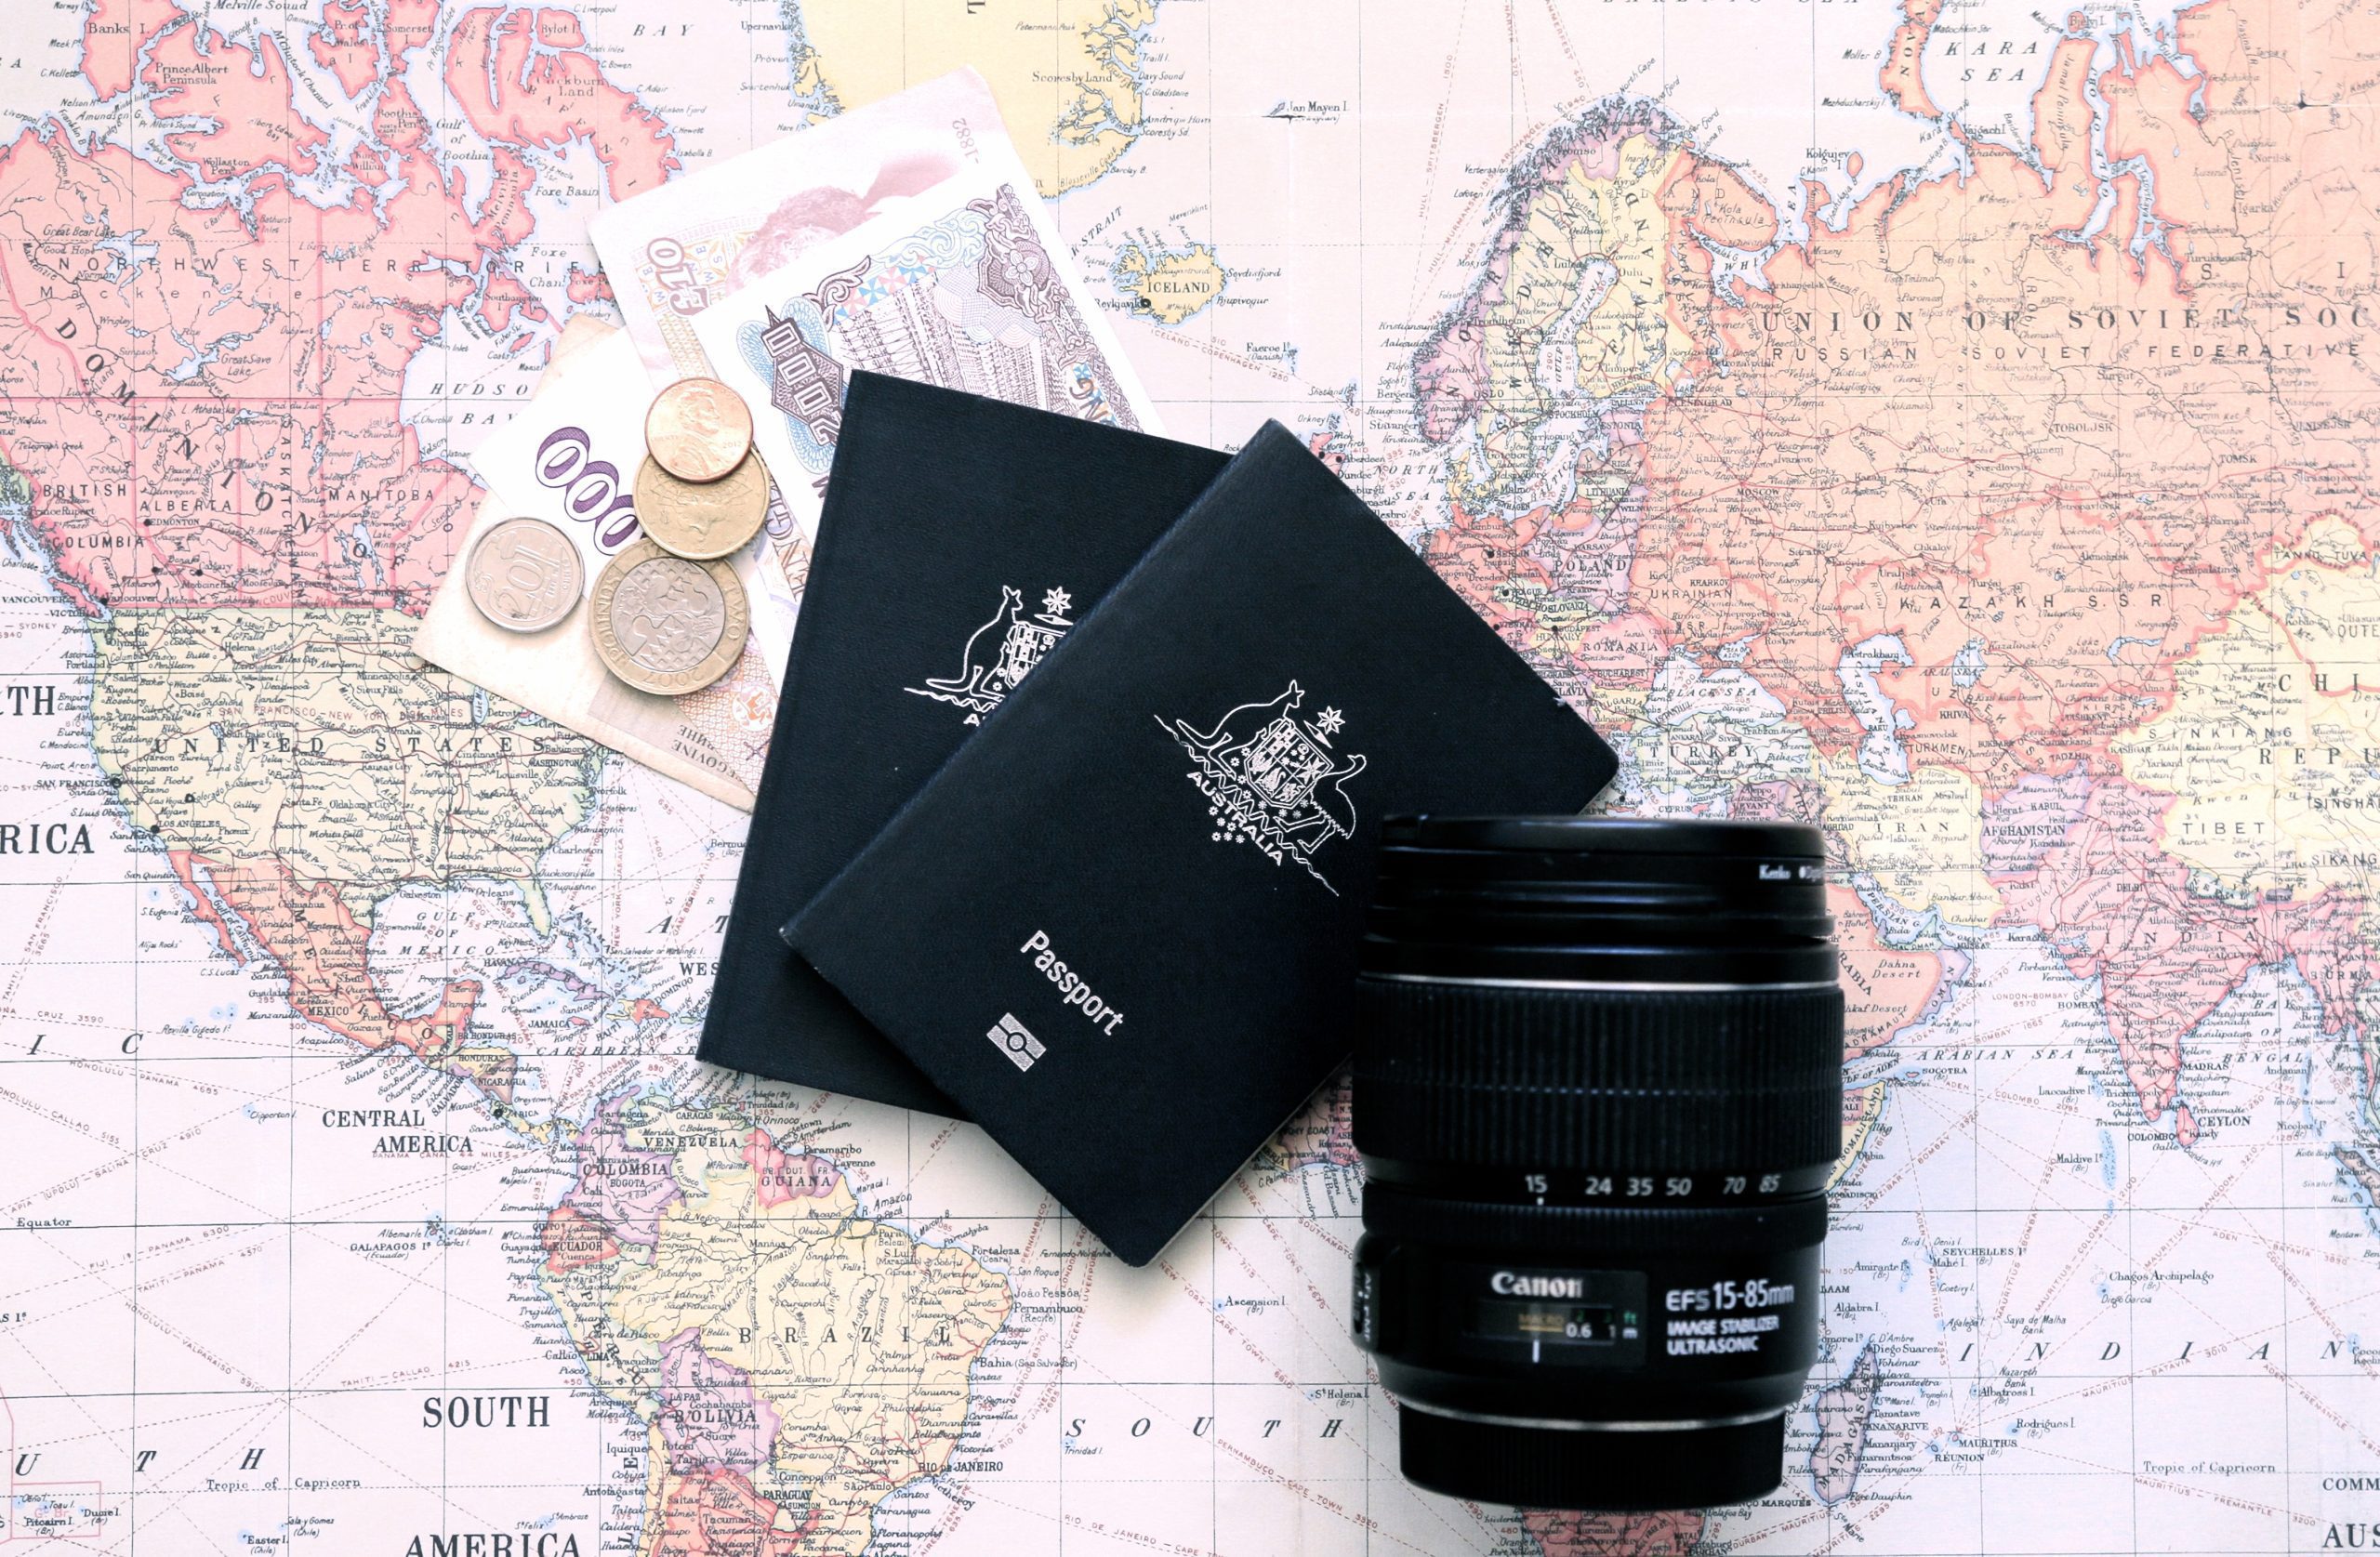 Passports and lens